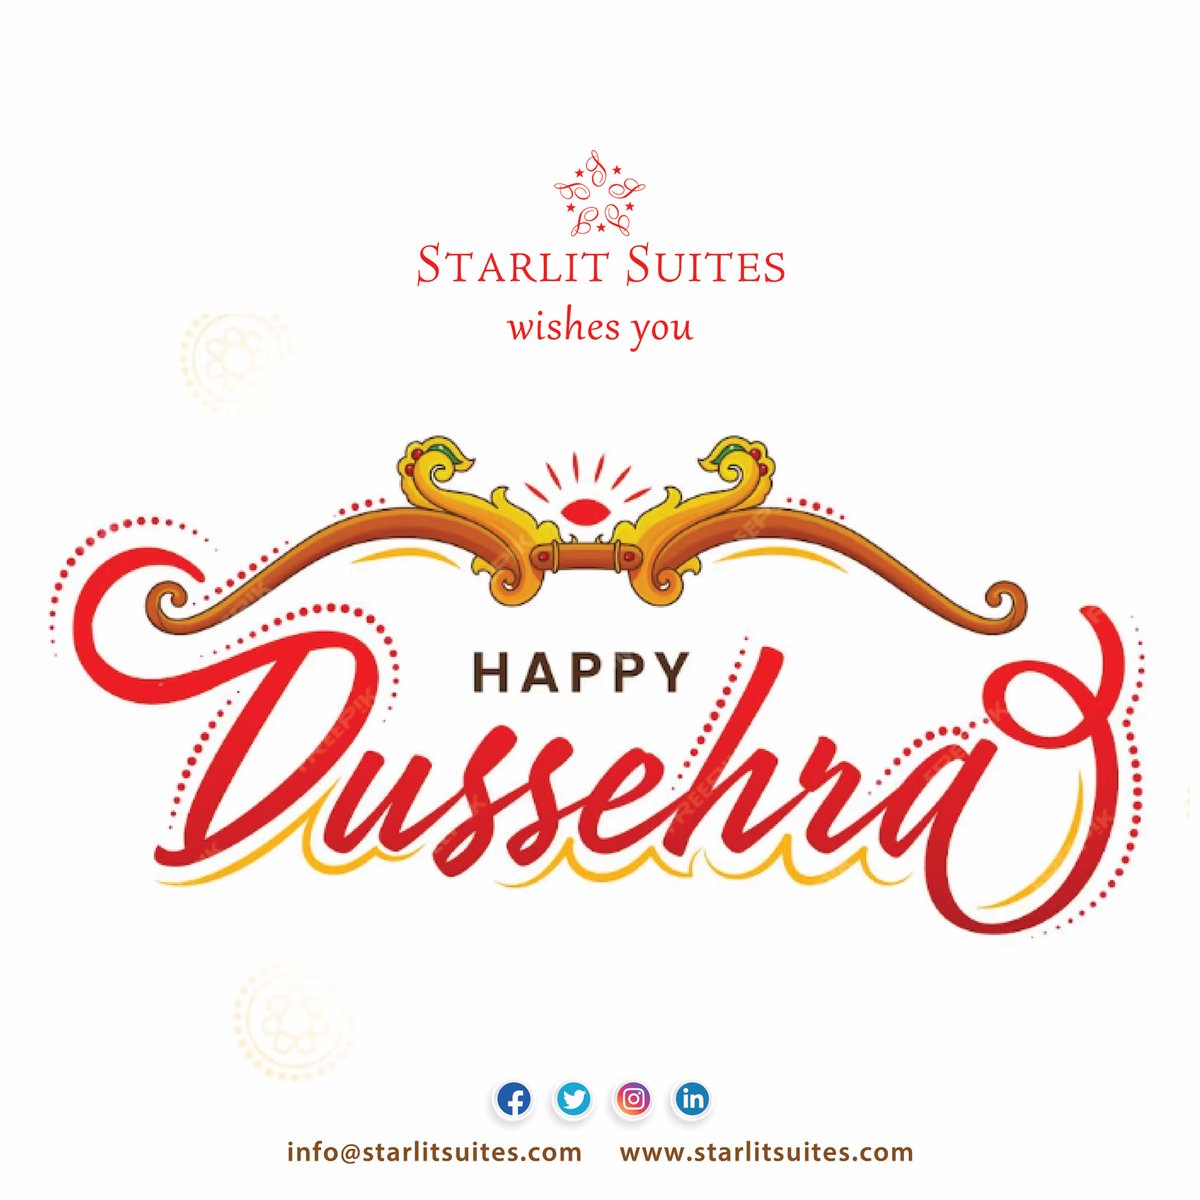 Wishing you a happy and blessed #Dussehra from all of us at Starlit Suites✨ May this auspicious festival bring good health, happiness and prosperity! #HappyDussehra #starlitsuites #Bengaluru #kochi #Neemrana #tirupati #shirdi #aparthotels #servicedapartments #hotel